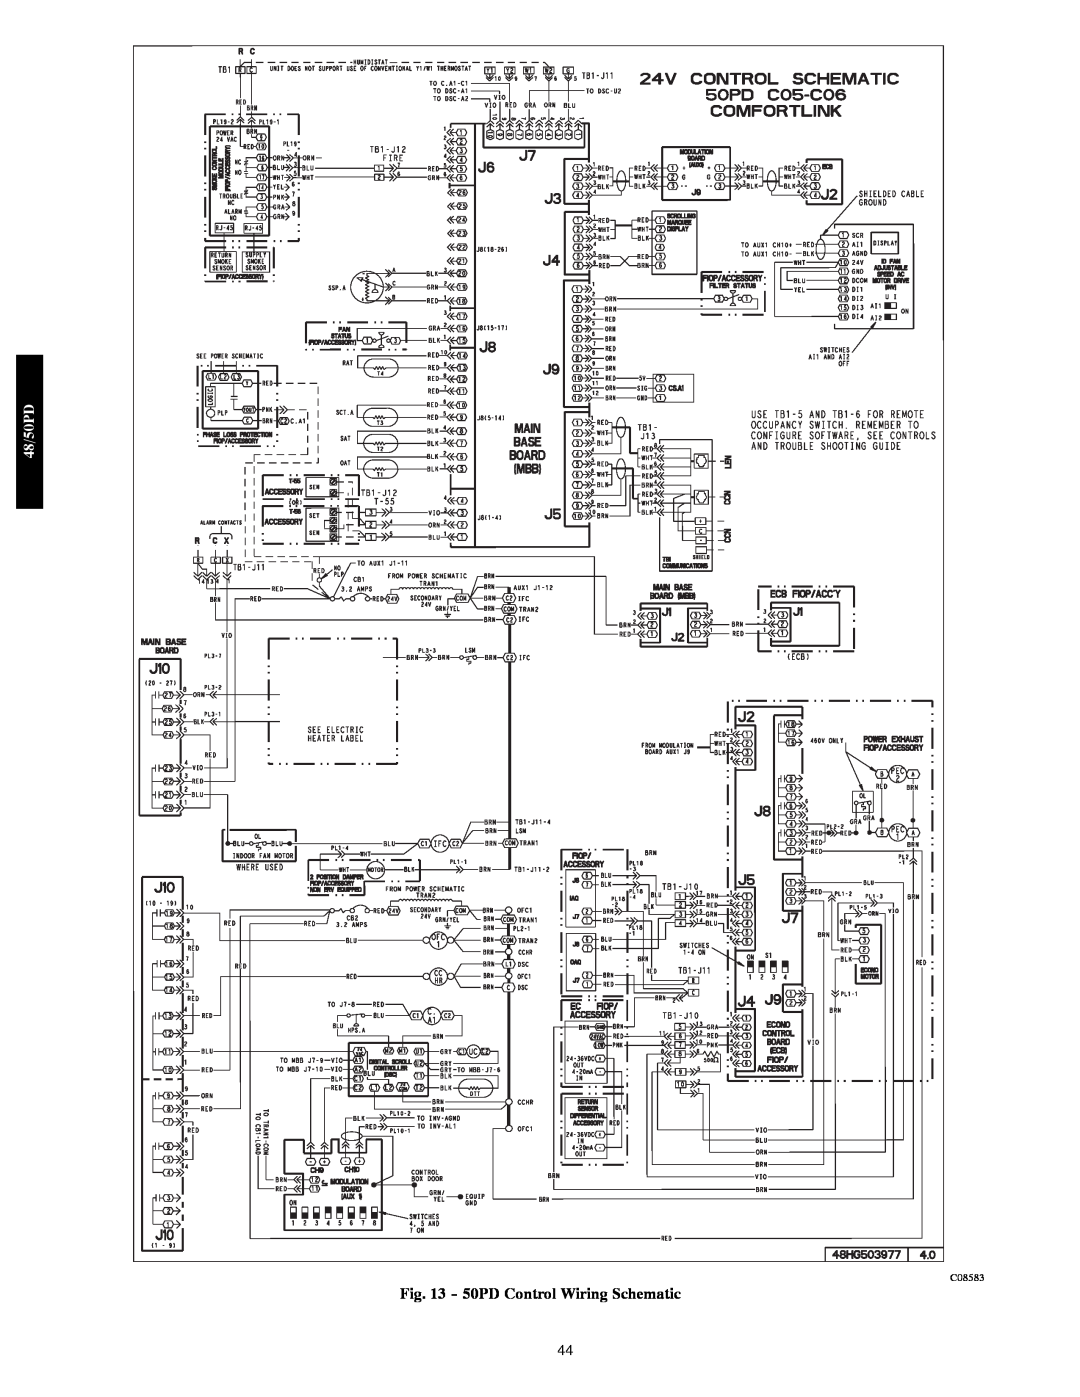 Carrier 48/50PD05 manual 50PD Control Wiring Schematic, C08583 